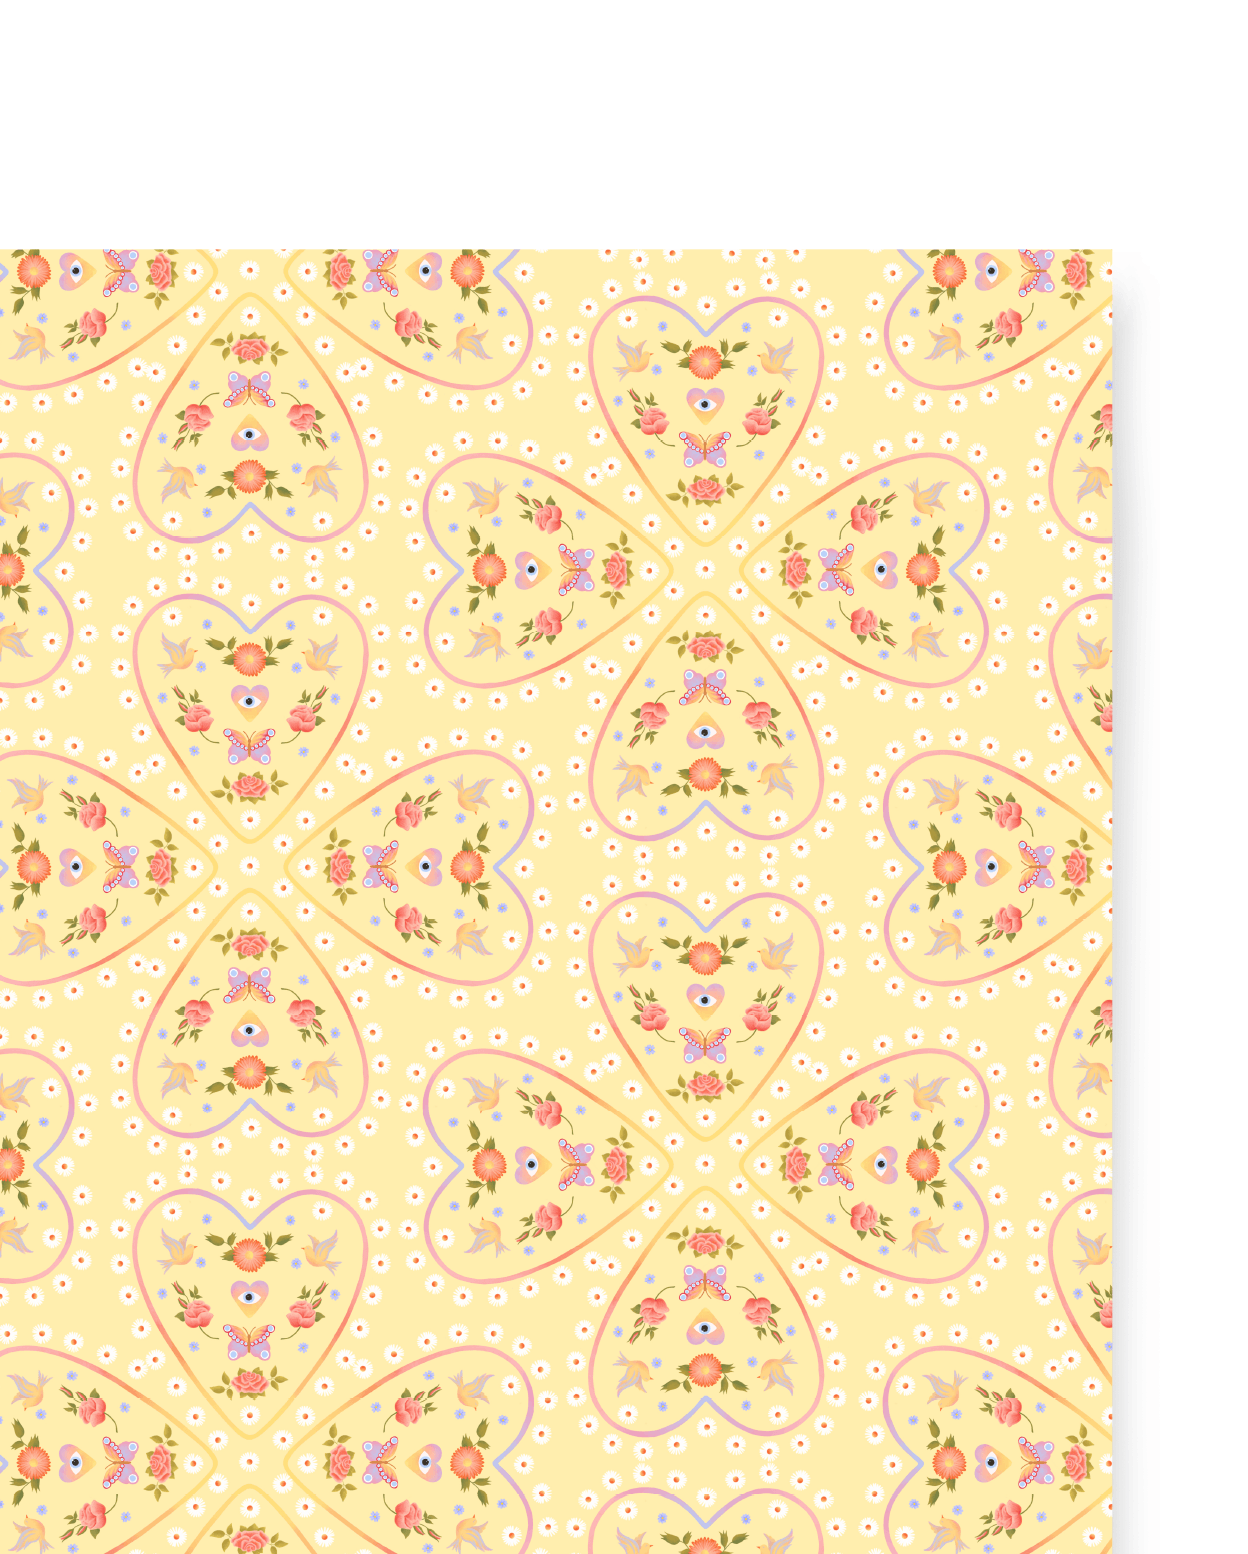 Single sheet of Mirrored Hearts gift wrap. Four hearts facing inward filled with doves, flowers, and hearts with eyes printed on a custard colored sheet.